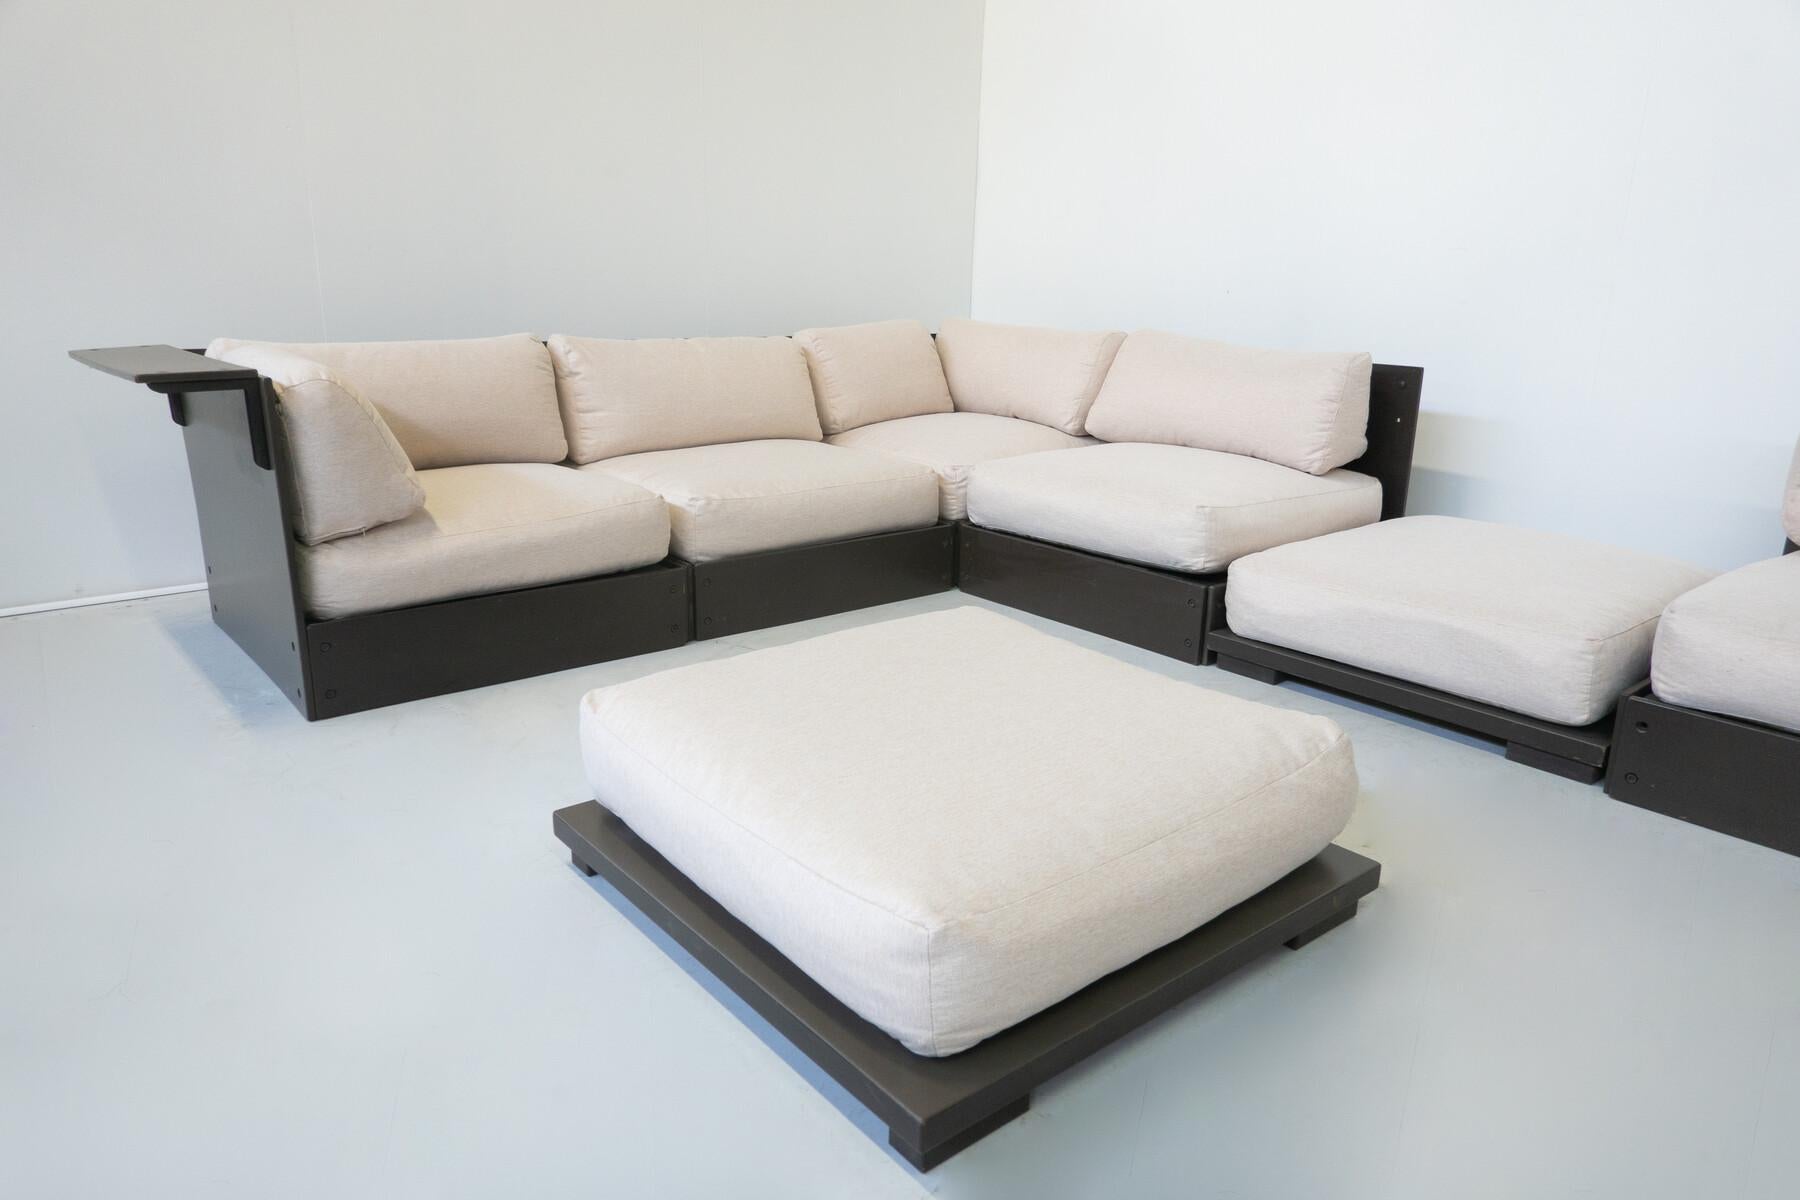 Mid-Century Modern Modular Sofa by Rolf Heide for ICF, 1970s - New Upholstery

Modular sofa, dimensions are variable 